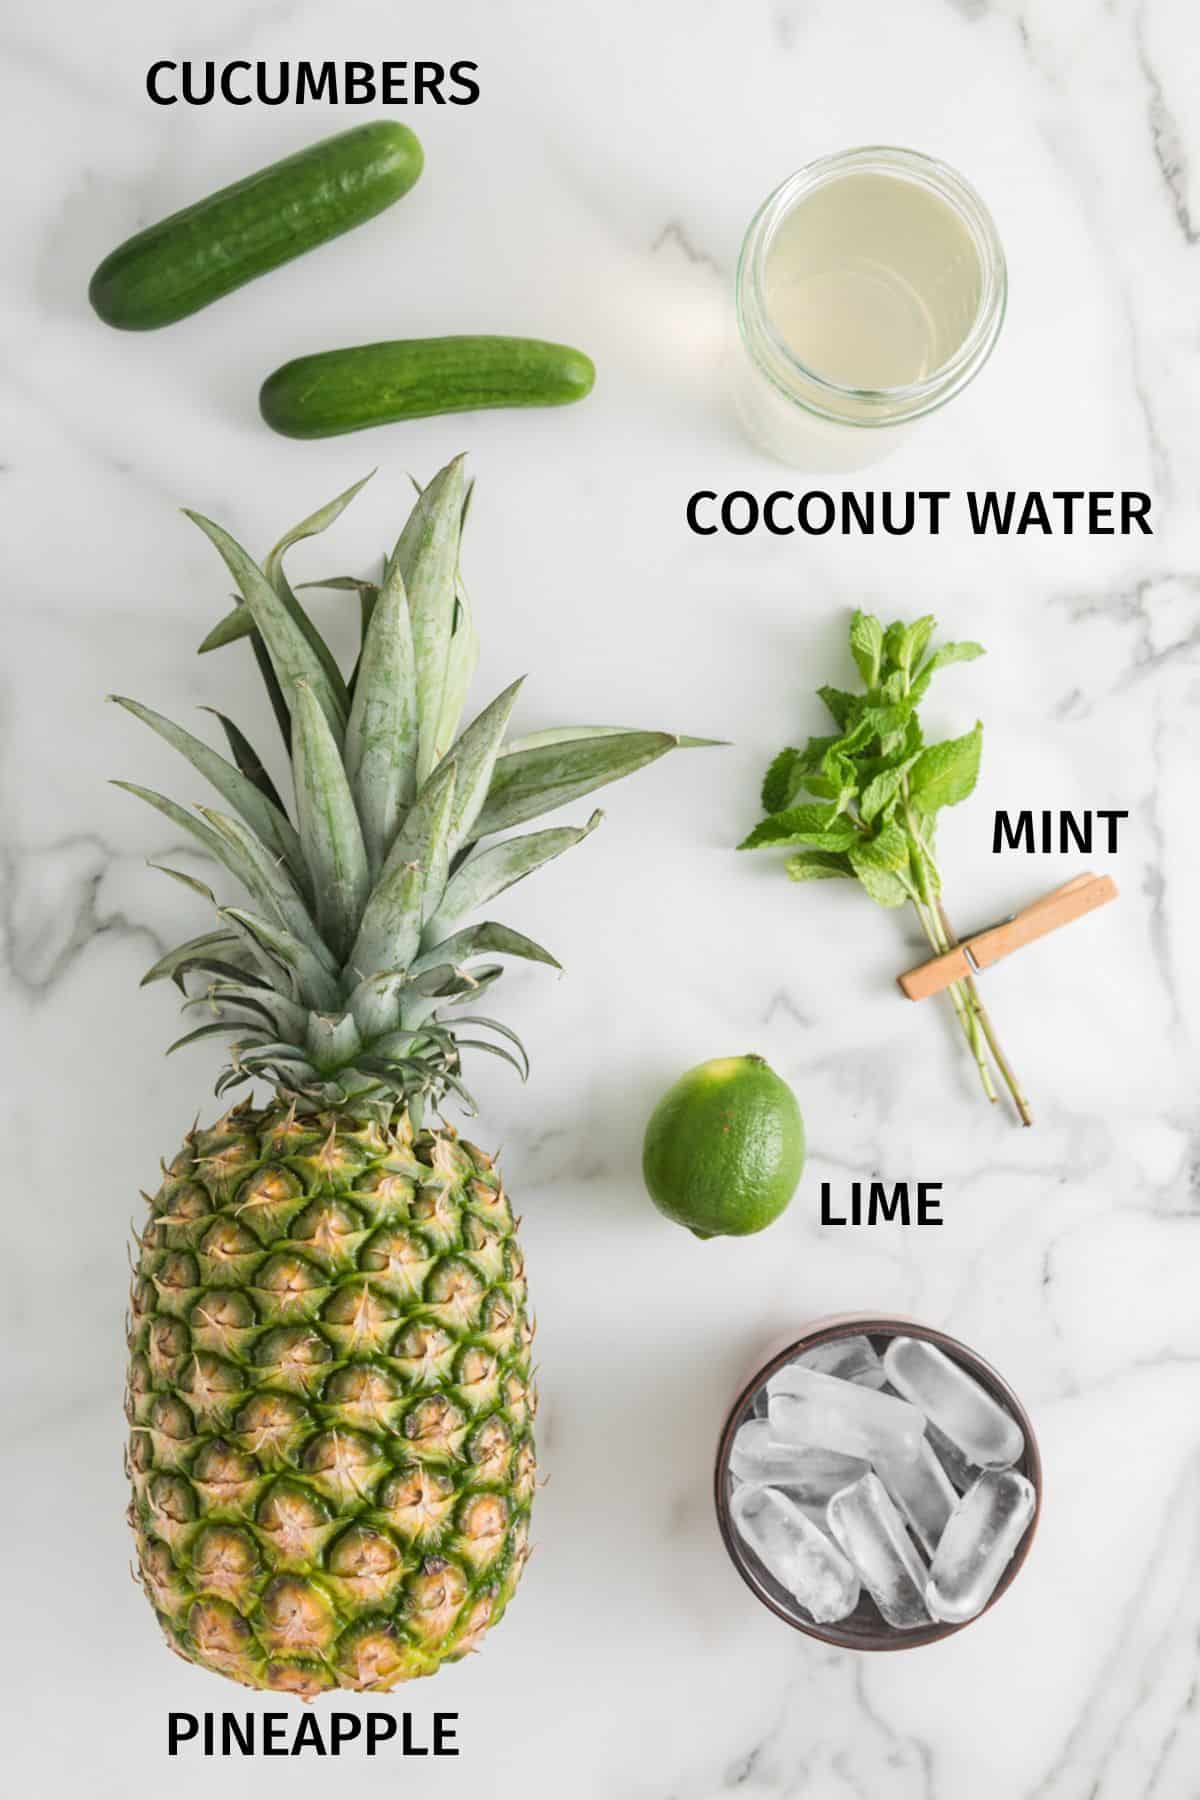 Ingredients to make pineapple cucumber smoothie on a white surface.